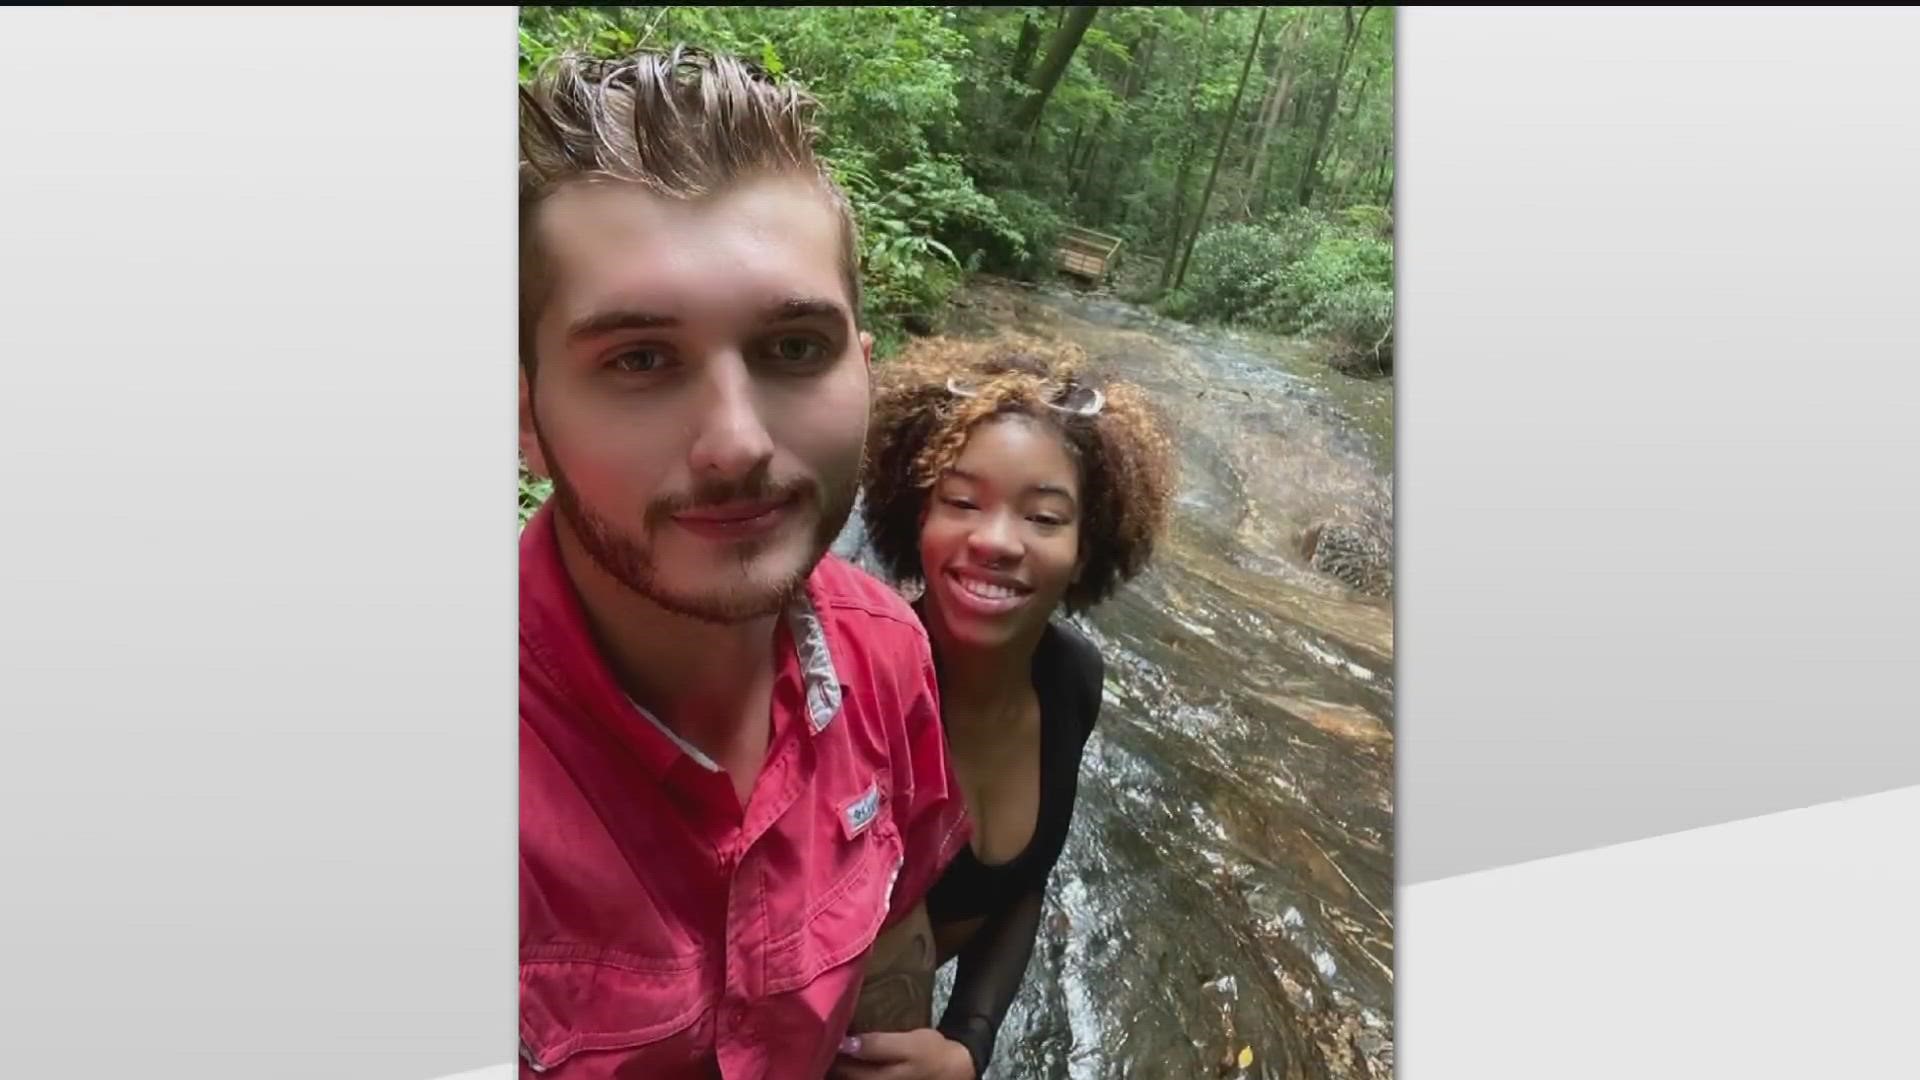 On their first date, the couple fell from the top of a waterfall. Seriously injured, they had to hike 30 minutes to get help.